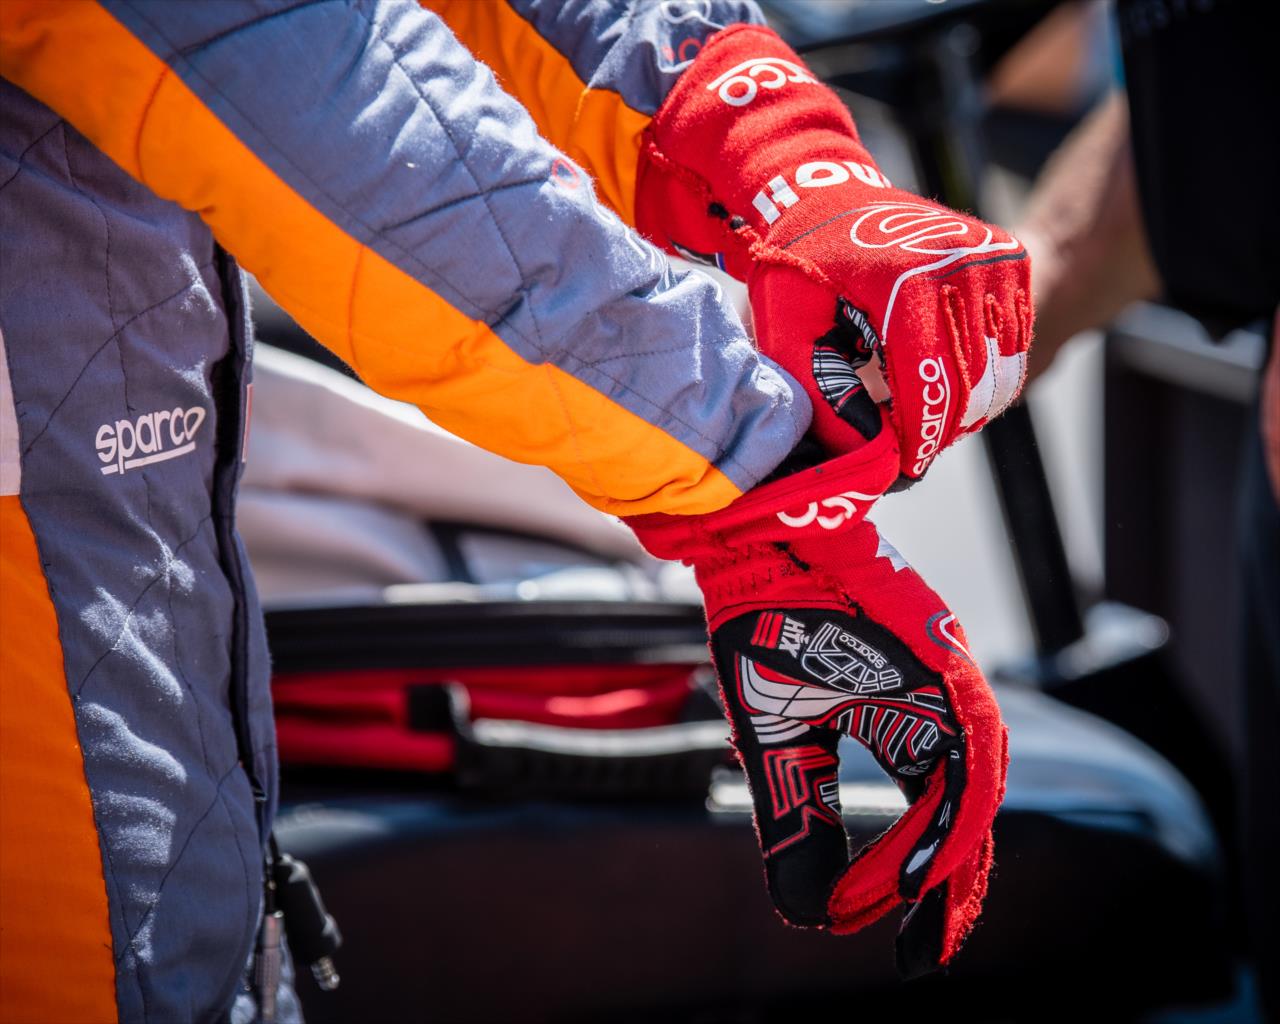 James Hinchcliffe puts on his gloves before qualifying for the Indianapolis 500 at the Indianapolis Motor Speedway Saturday, August 15, 2020 -- Photo by: Karl Zemlin